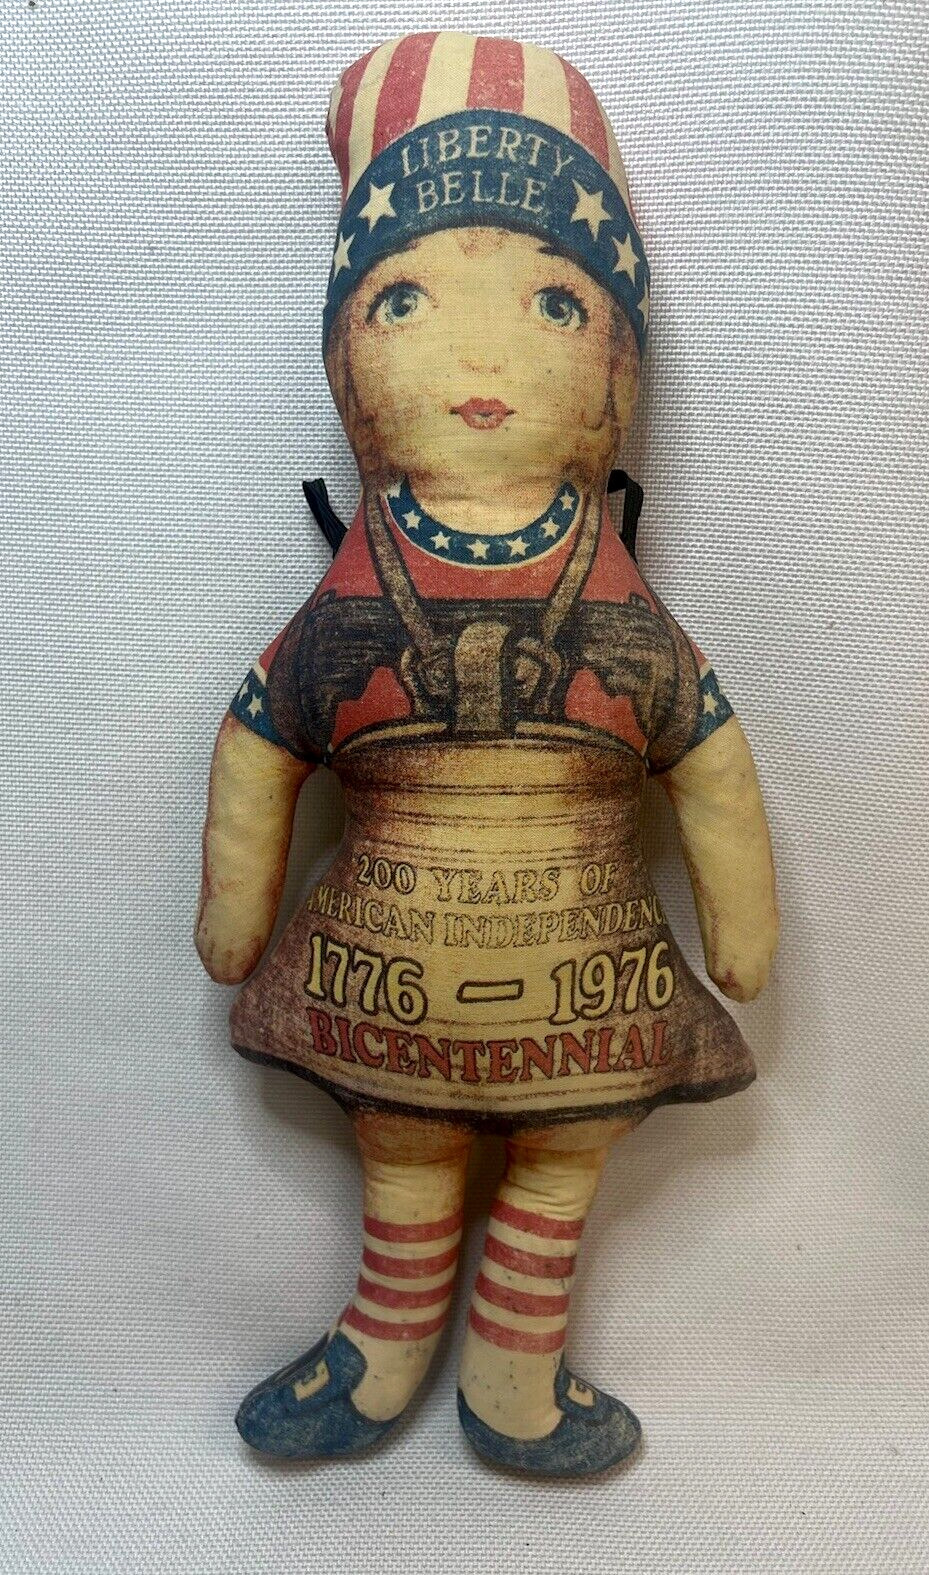 Vintage 4th of July Primitive Liberty Belle The Toy Works 1976 Hand sewn Doll